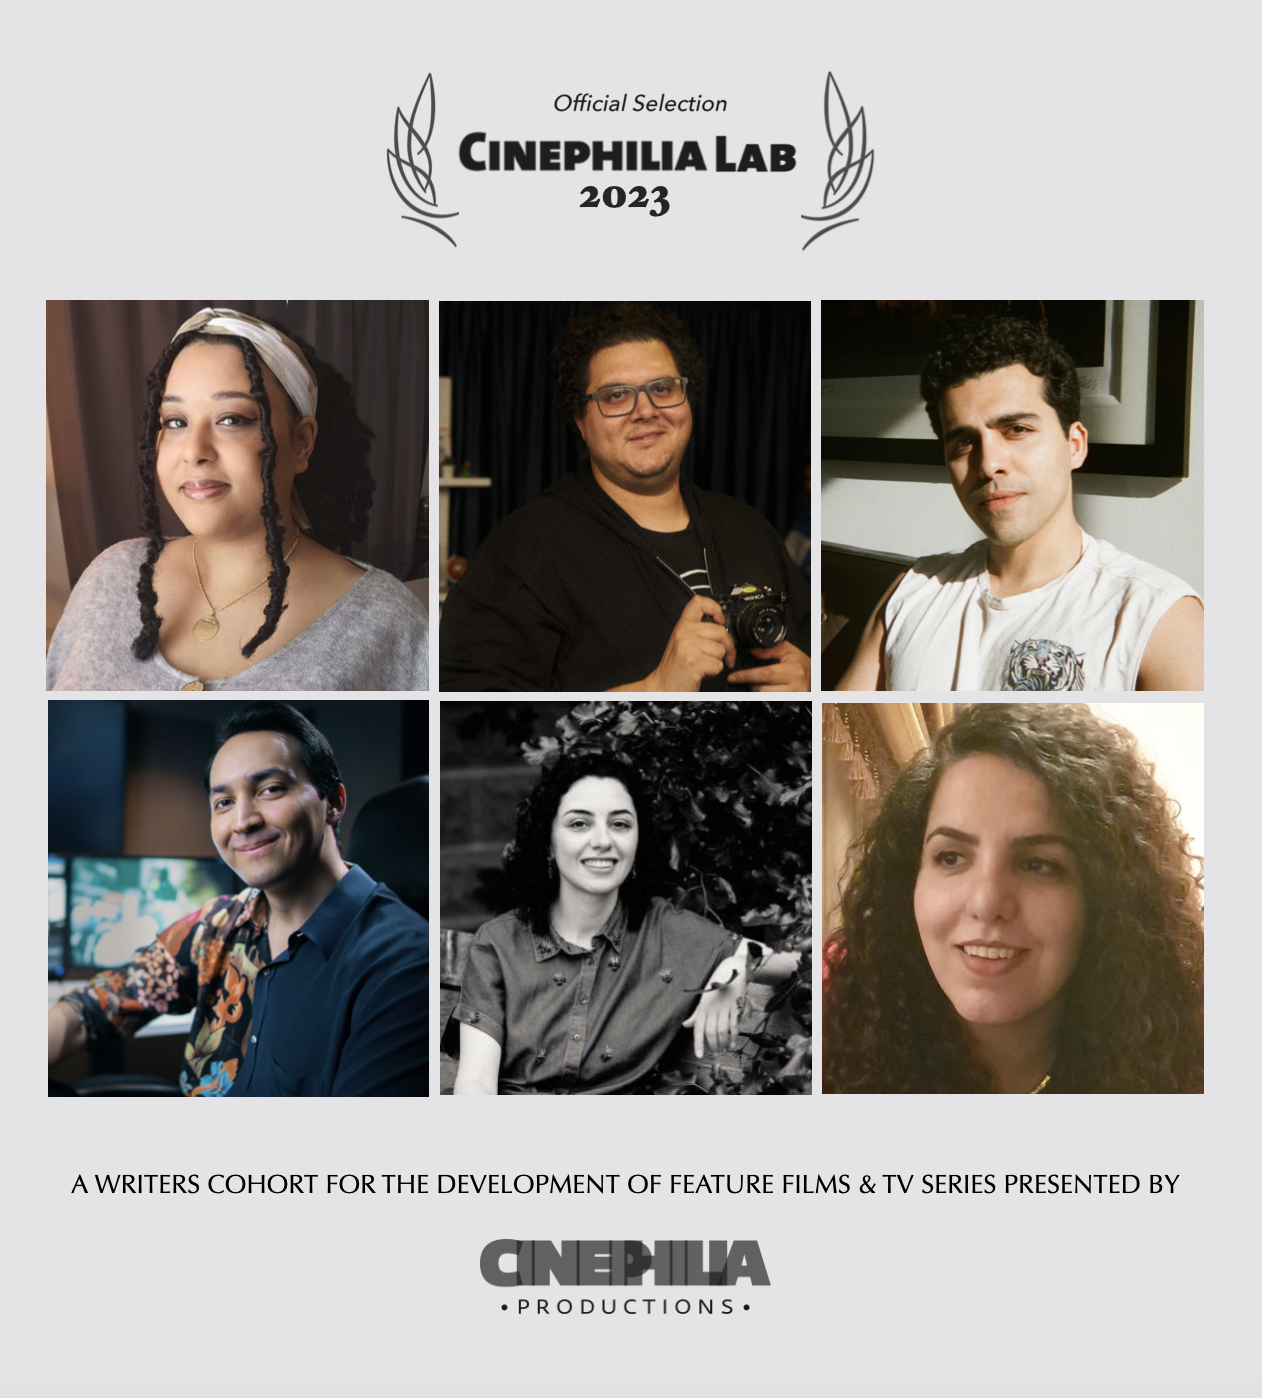  OFFICIAL SELECTION CINEPHILIA LAB 2023 